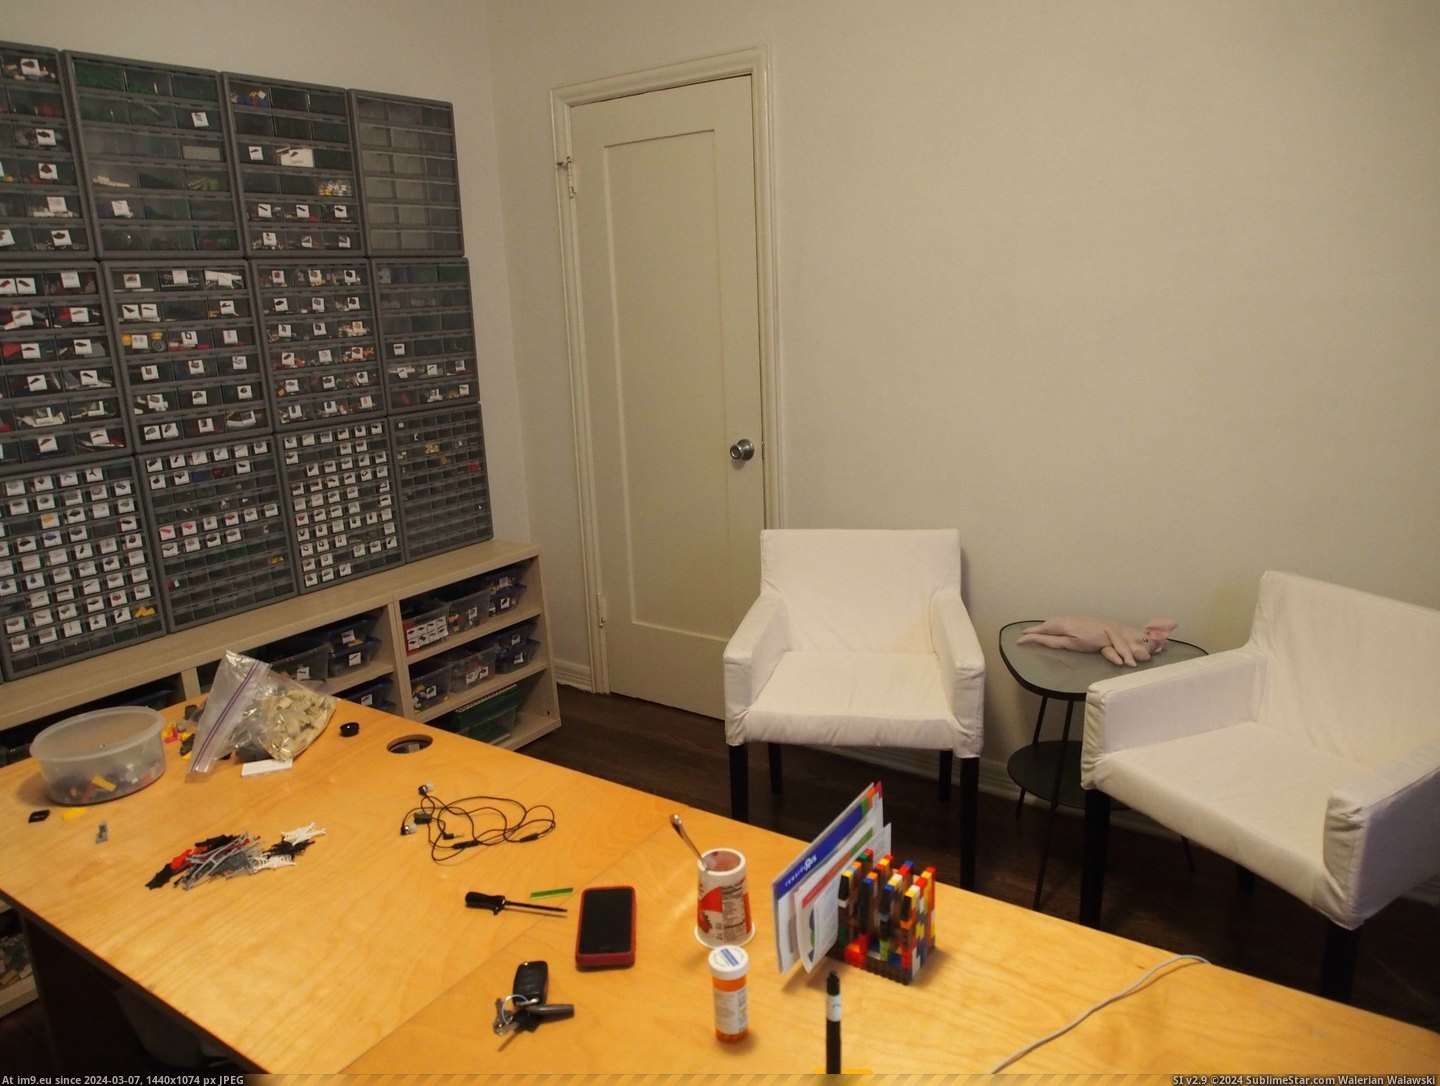 #Room #Lego #Finished #Finally [Pics] My Lego room is finally finished! 1 Pic. (Bild von album My r/PICS favs))